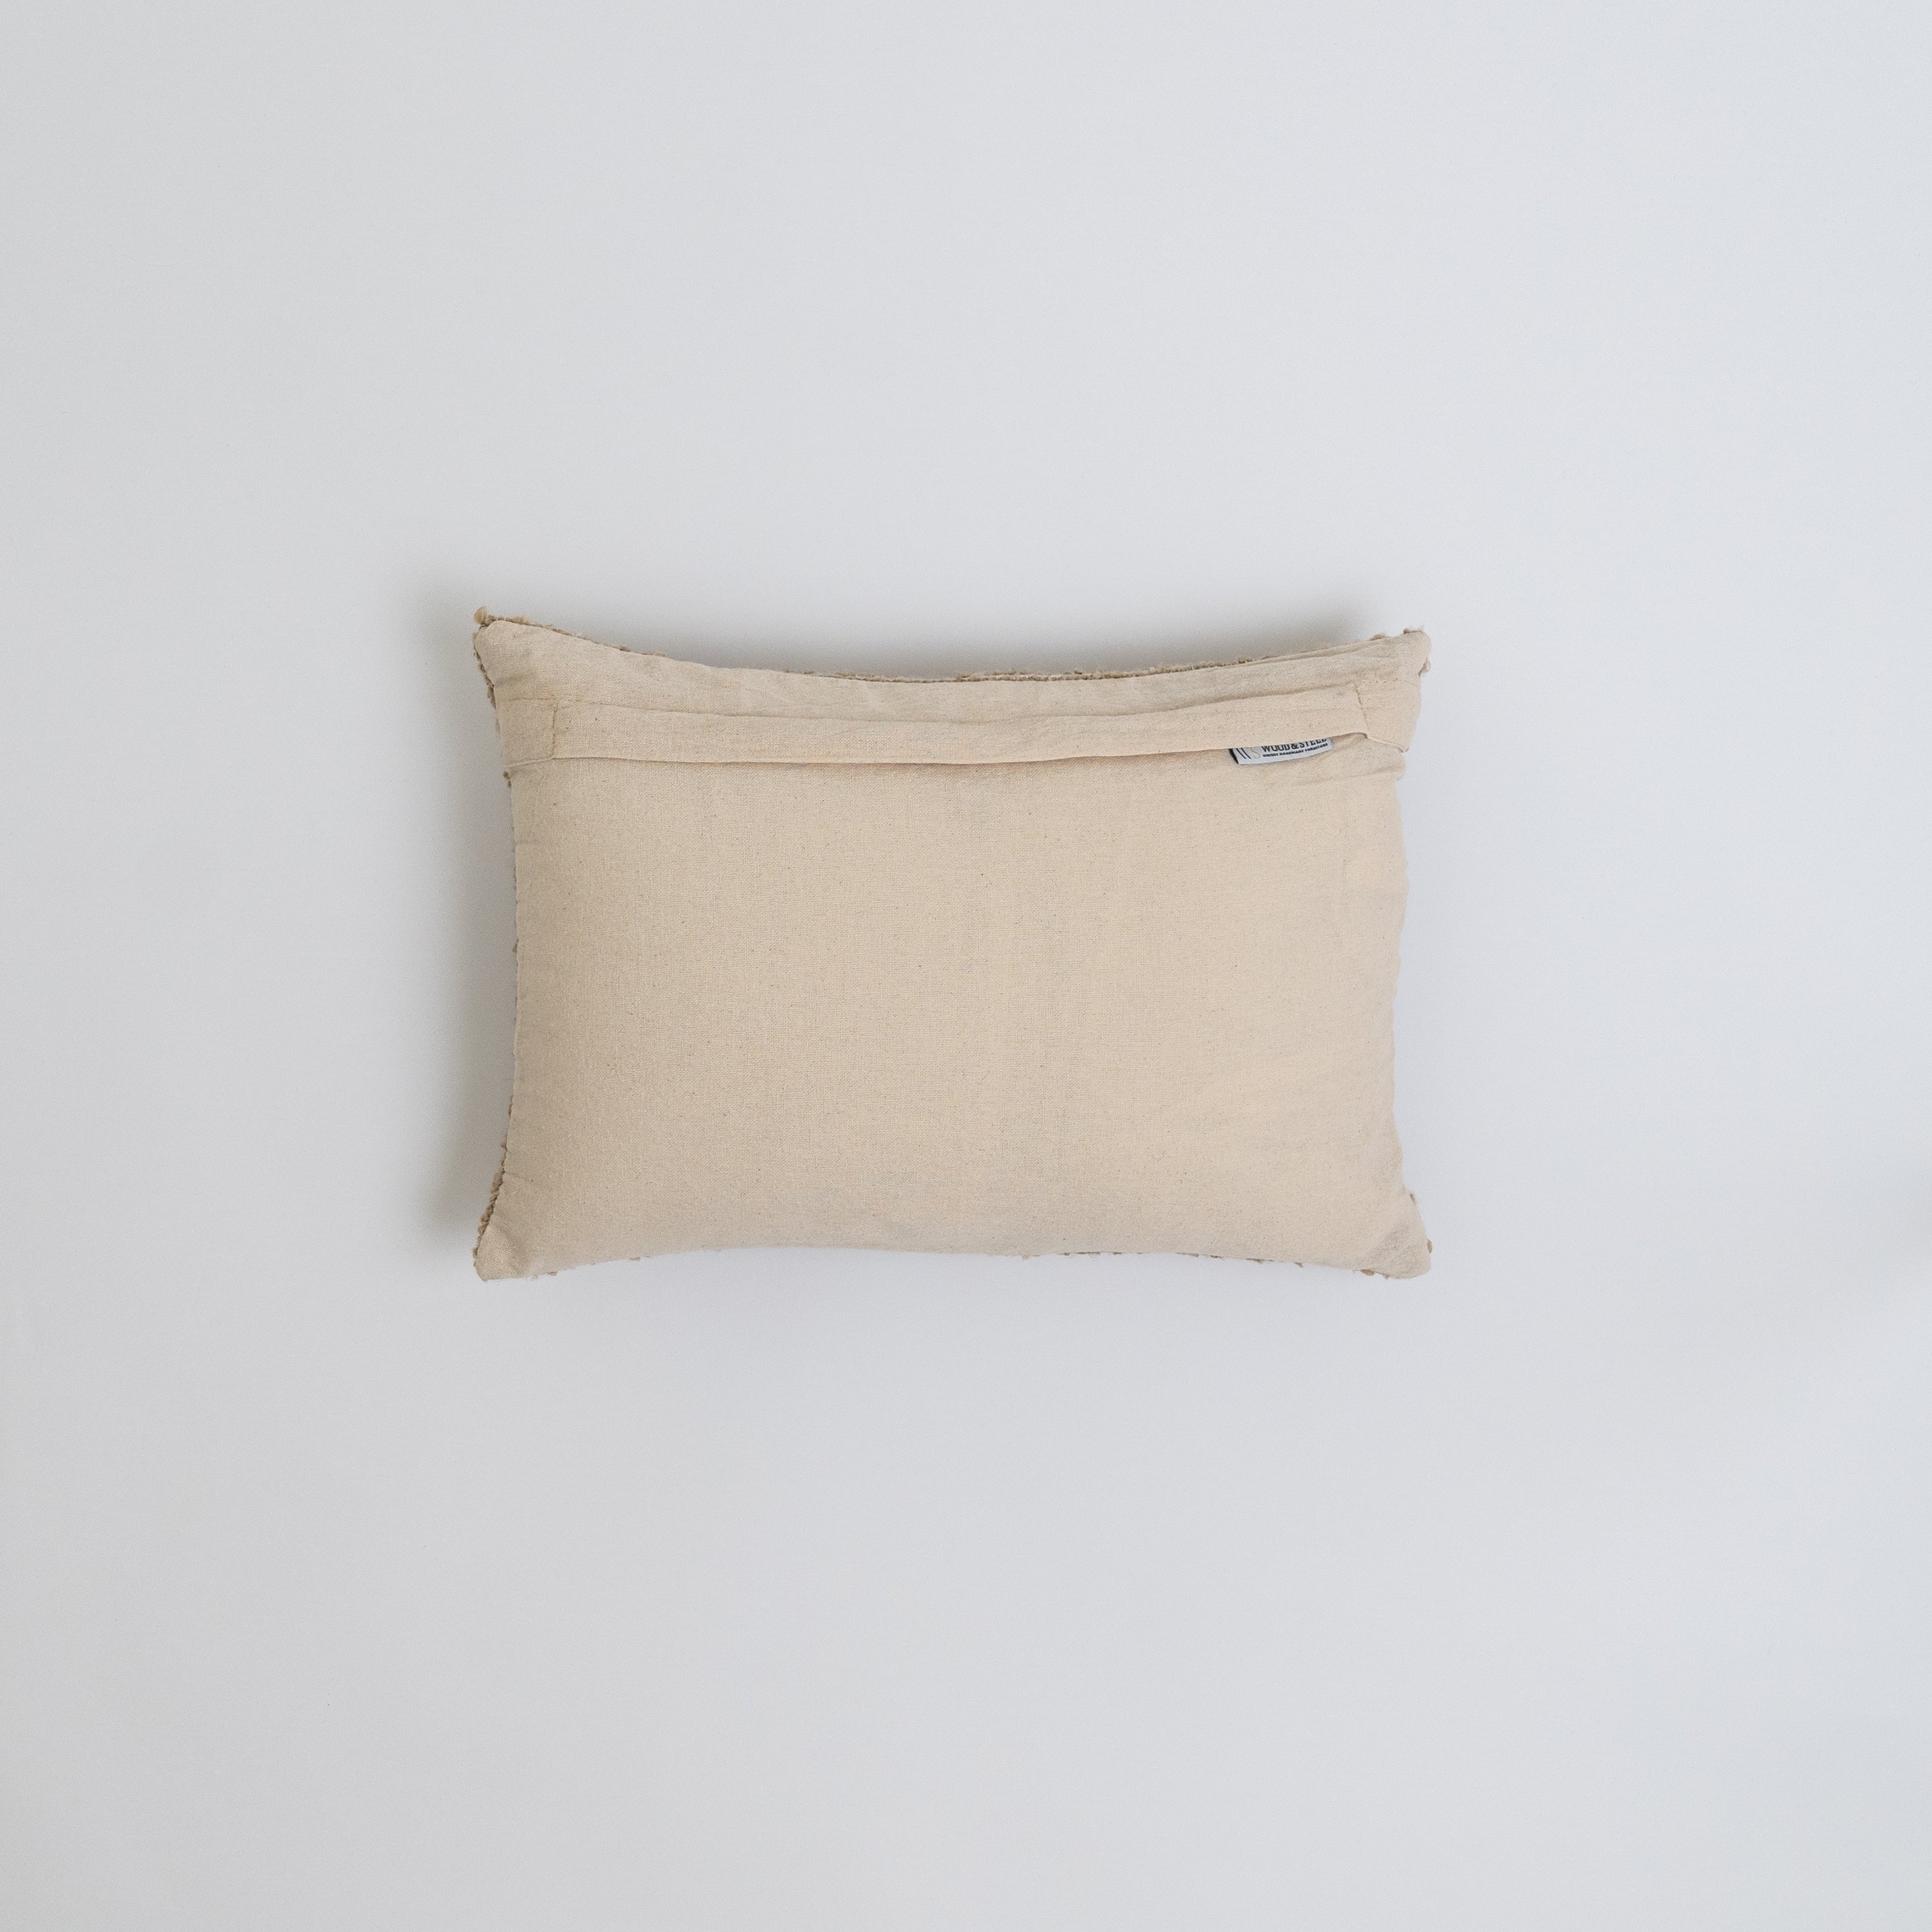 Cushion Cover 25x40cm - Wood and Steel Furnitures